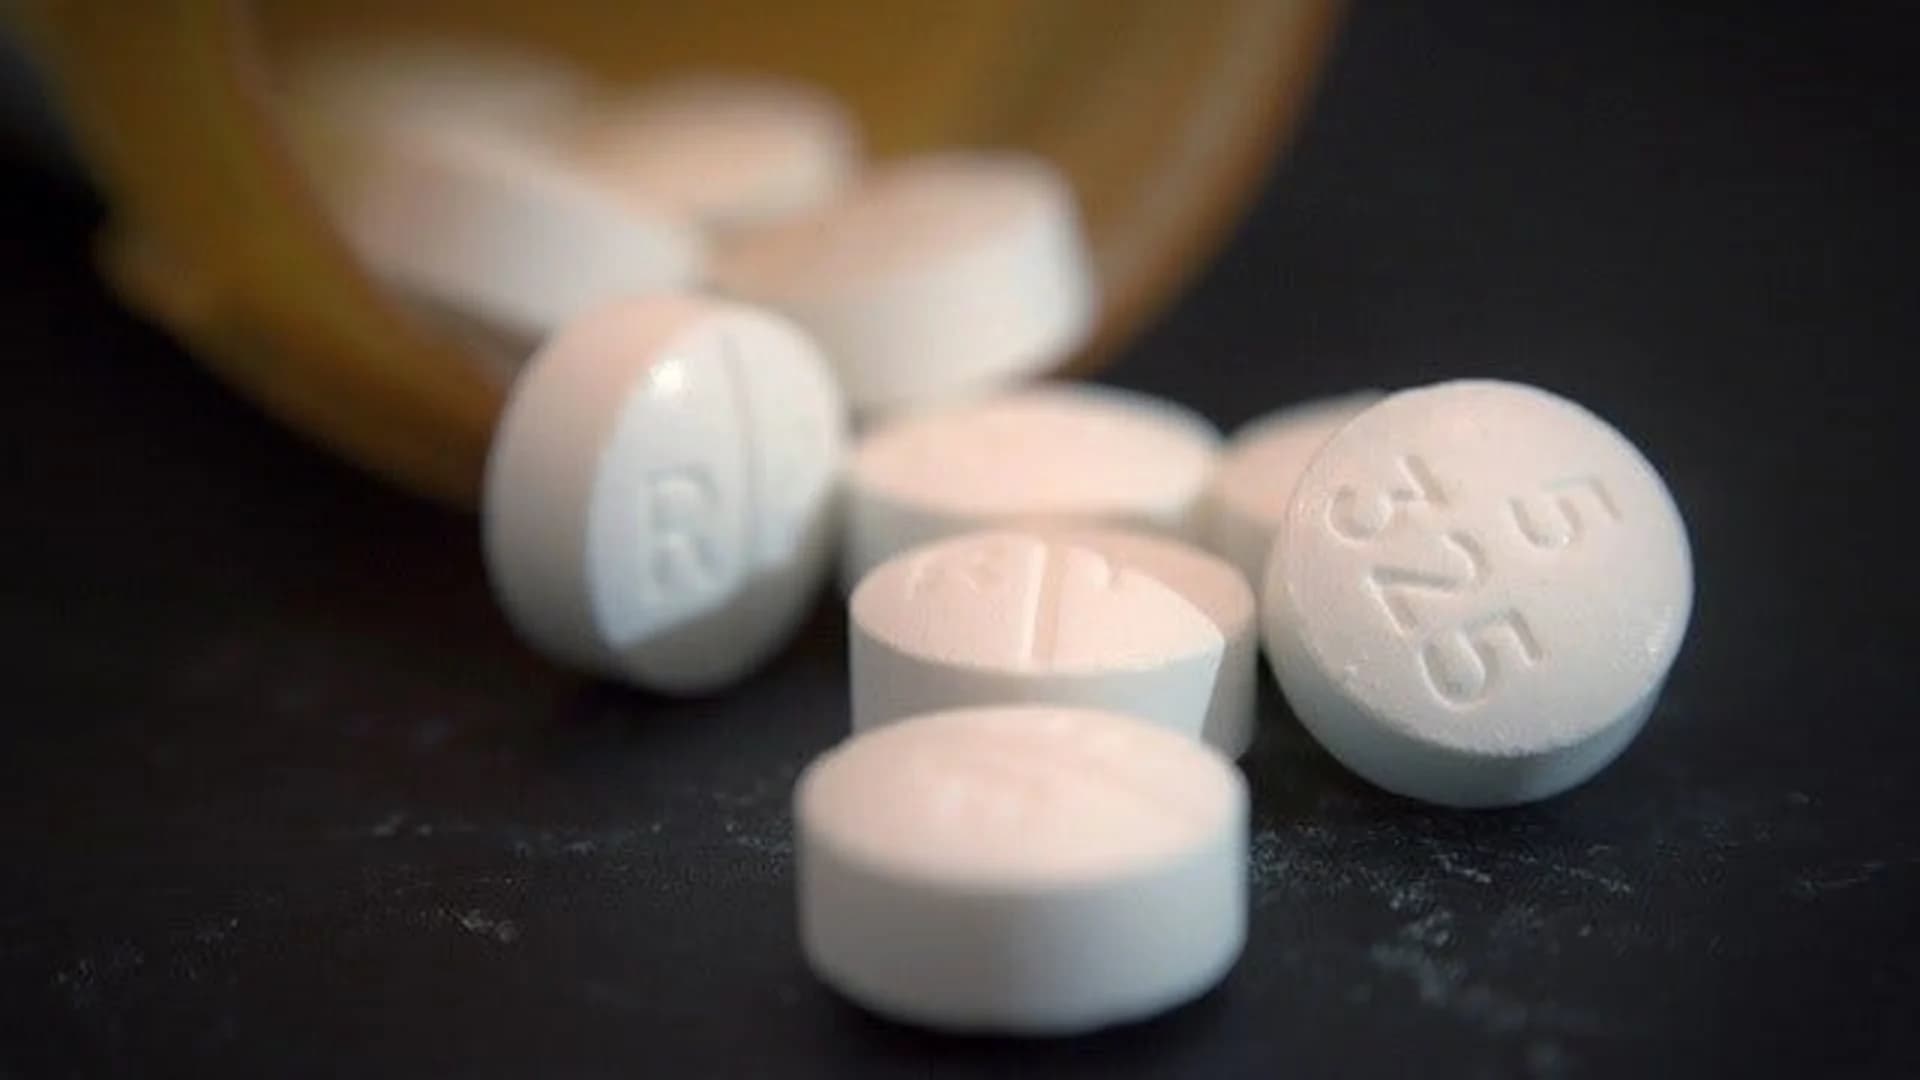 Camden County sues OxyContin maker, alleges racketeering